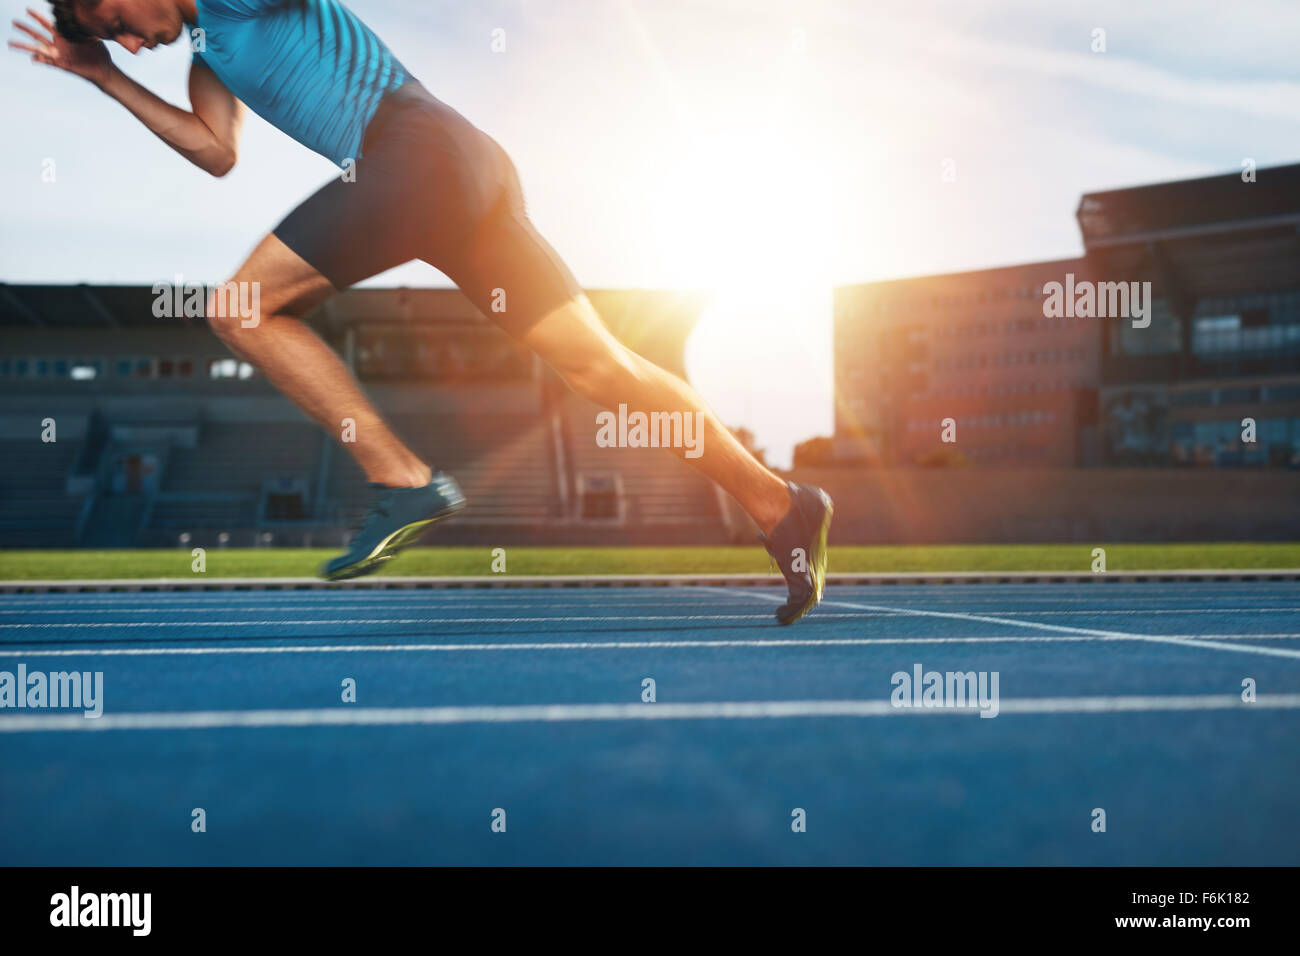 Shot of young male athlete launching off the start line in a race. Runner running on racetrack in athletics stadium. Stock Photo